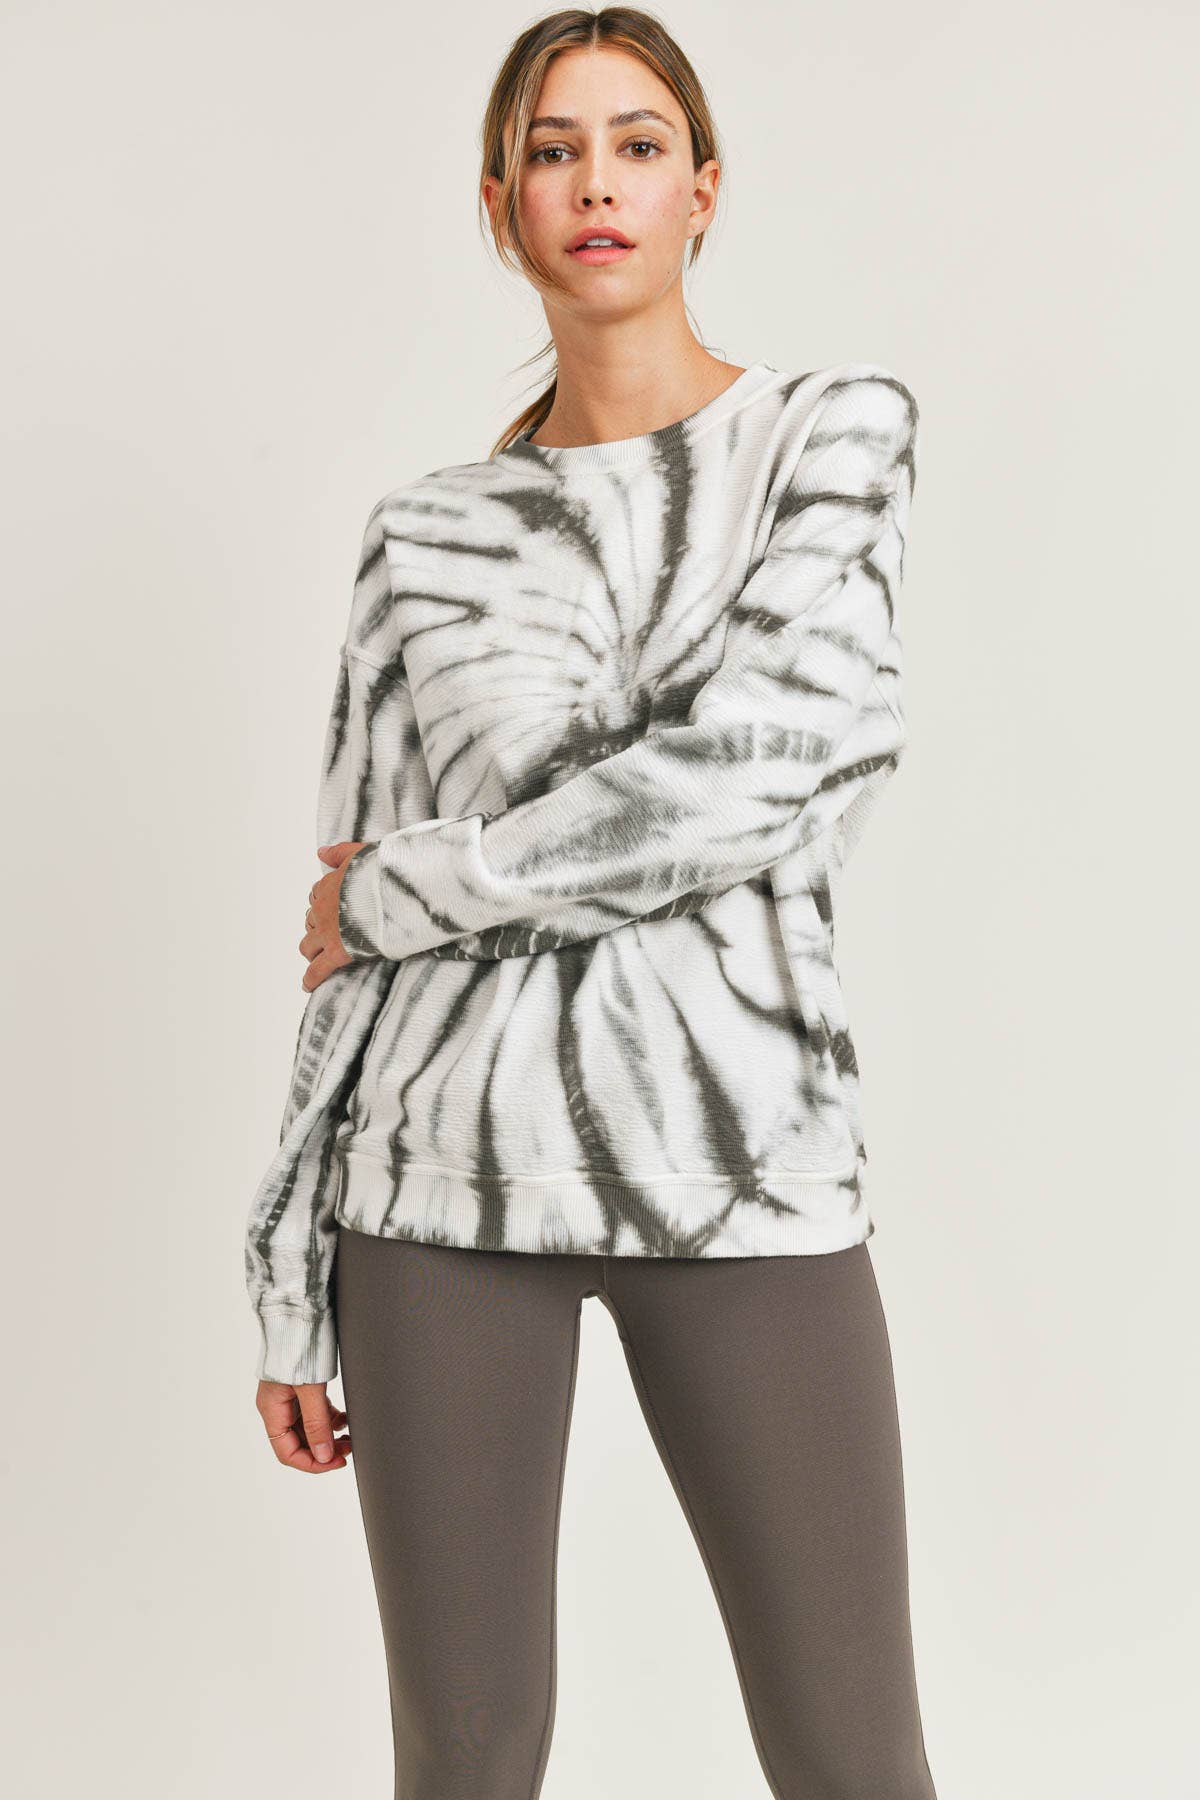 Swirl Tie-Dye Pullover in Moon Mist- Misses and Plus (S-3X)